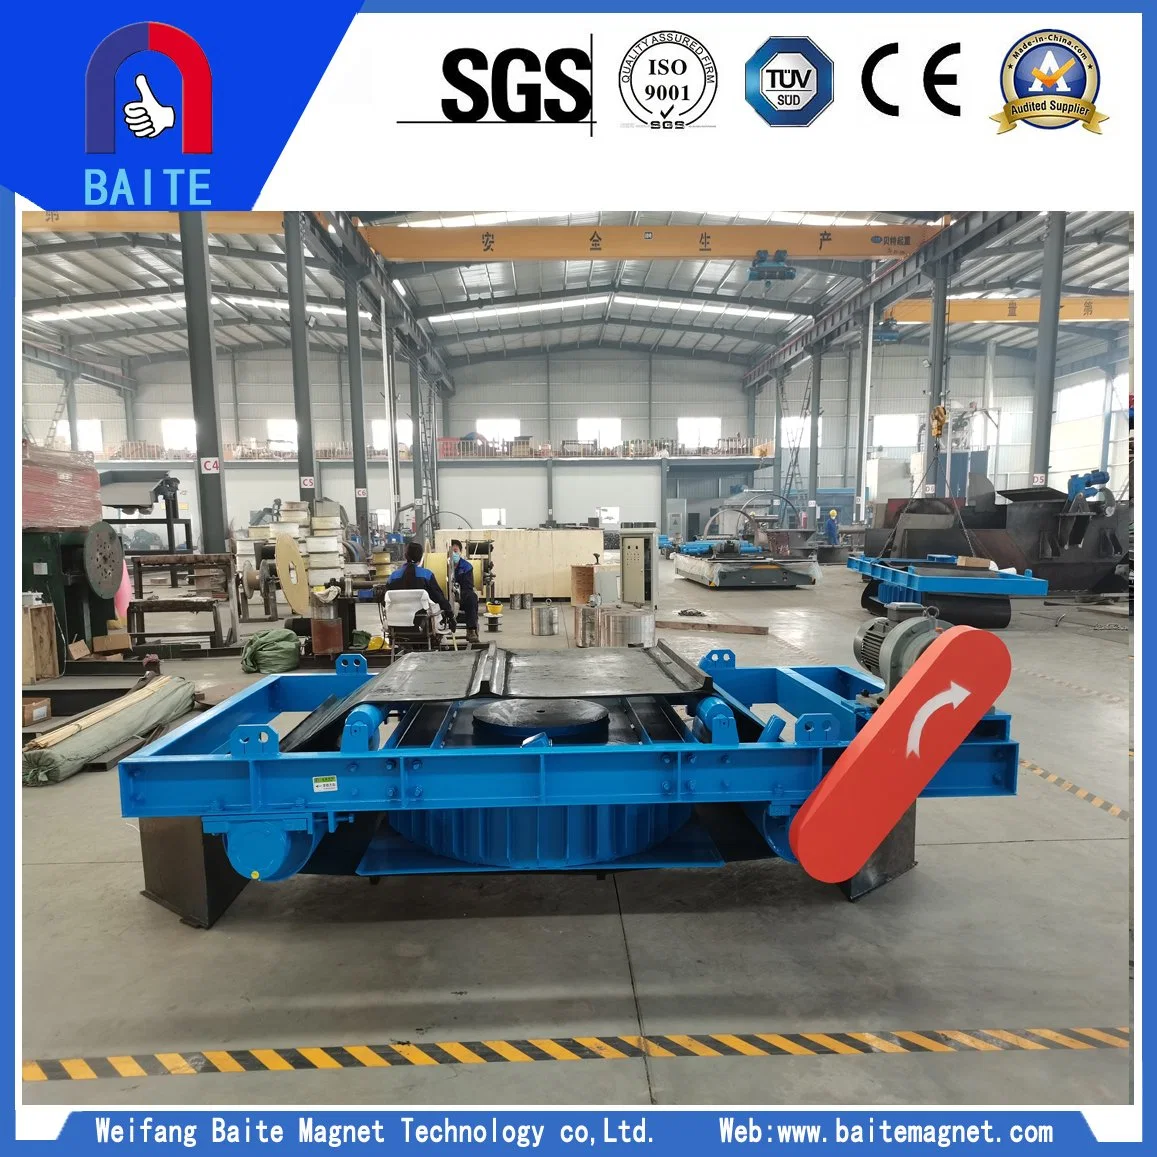 Rcdd Self Cleaning Magnetic Separator Machine/Over Belt Electric Magnetic Separator in Coal Handling/Mining/Cement/Chemical/Steel/Paper/Power Plant